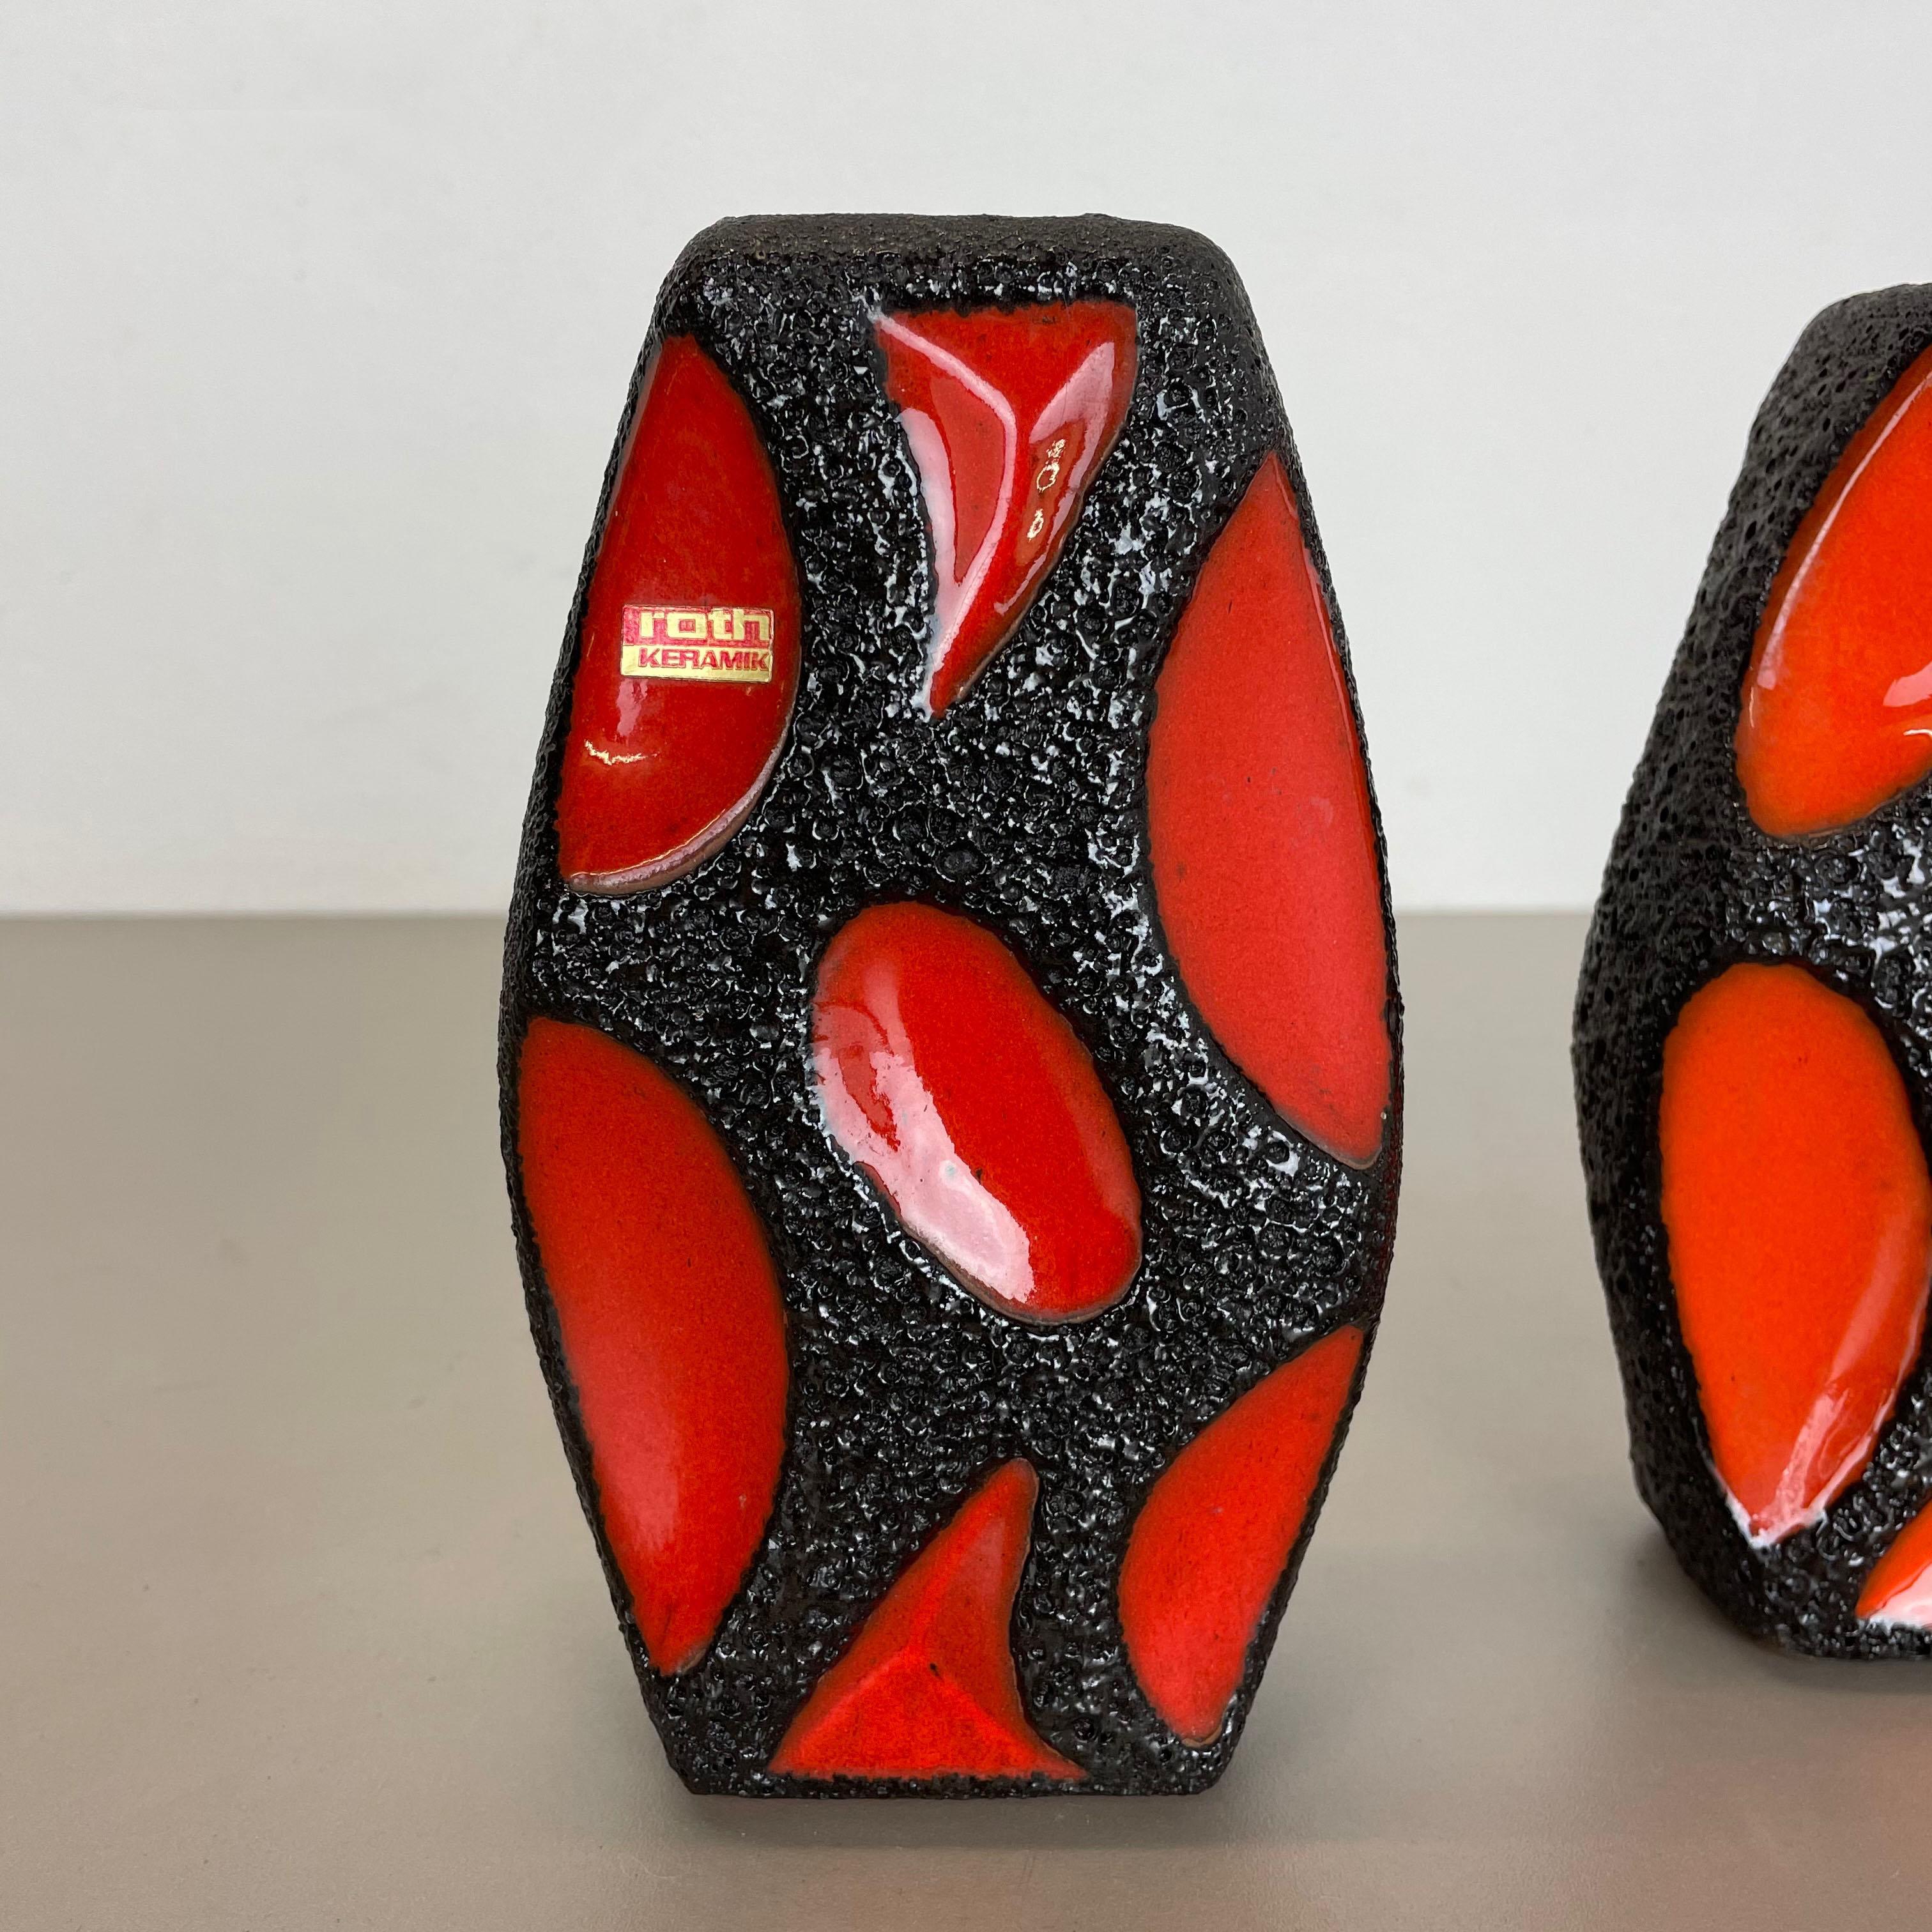 Set of 2 Original 1970 Ceramic Studio Pottery Vase by Roth Ceramics, Germany In Good Condition For Sale In Kirchlengern, DE